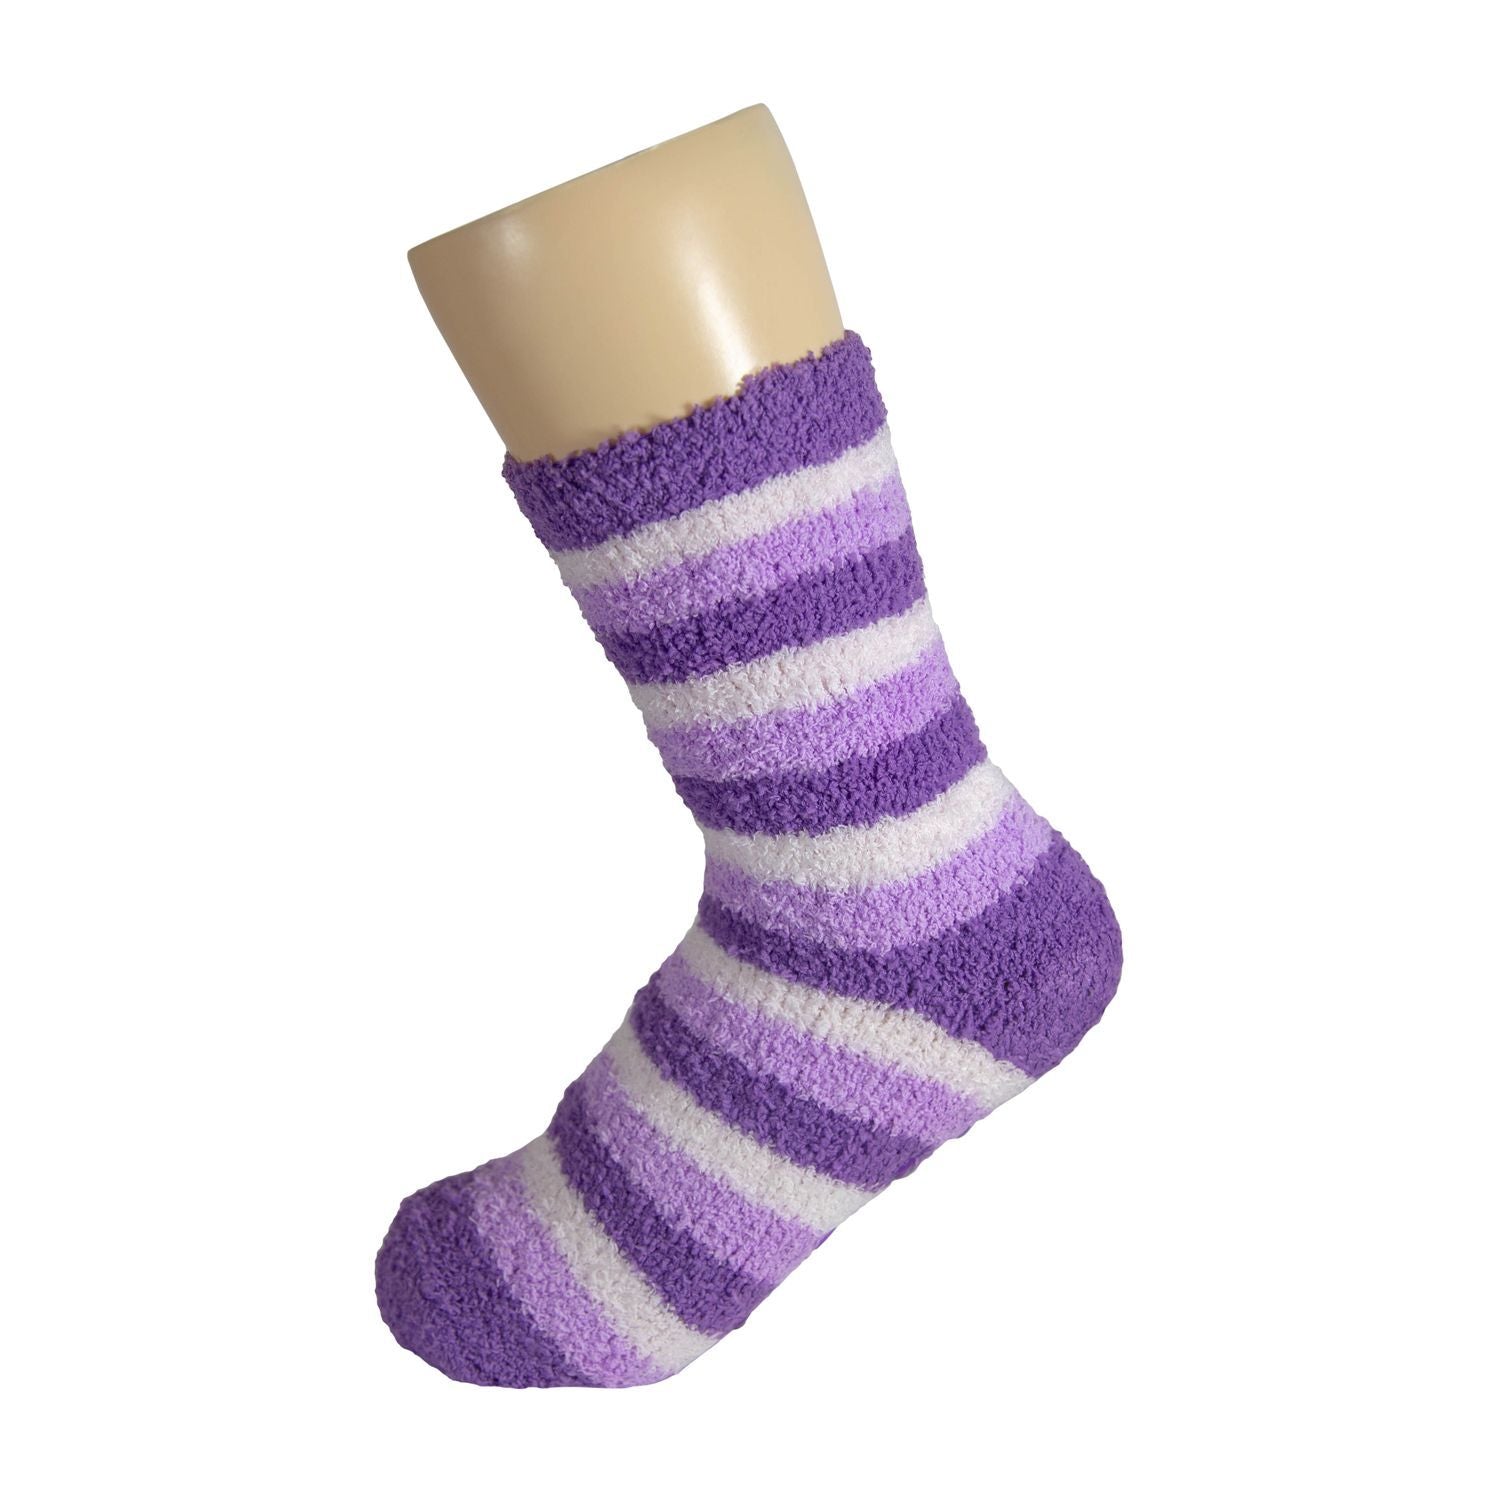 Purple White and Violet Striped Anti Skid Fuzzy Socks with Rubber Grips For Women